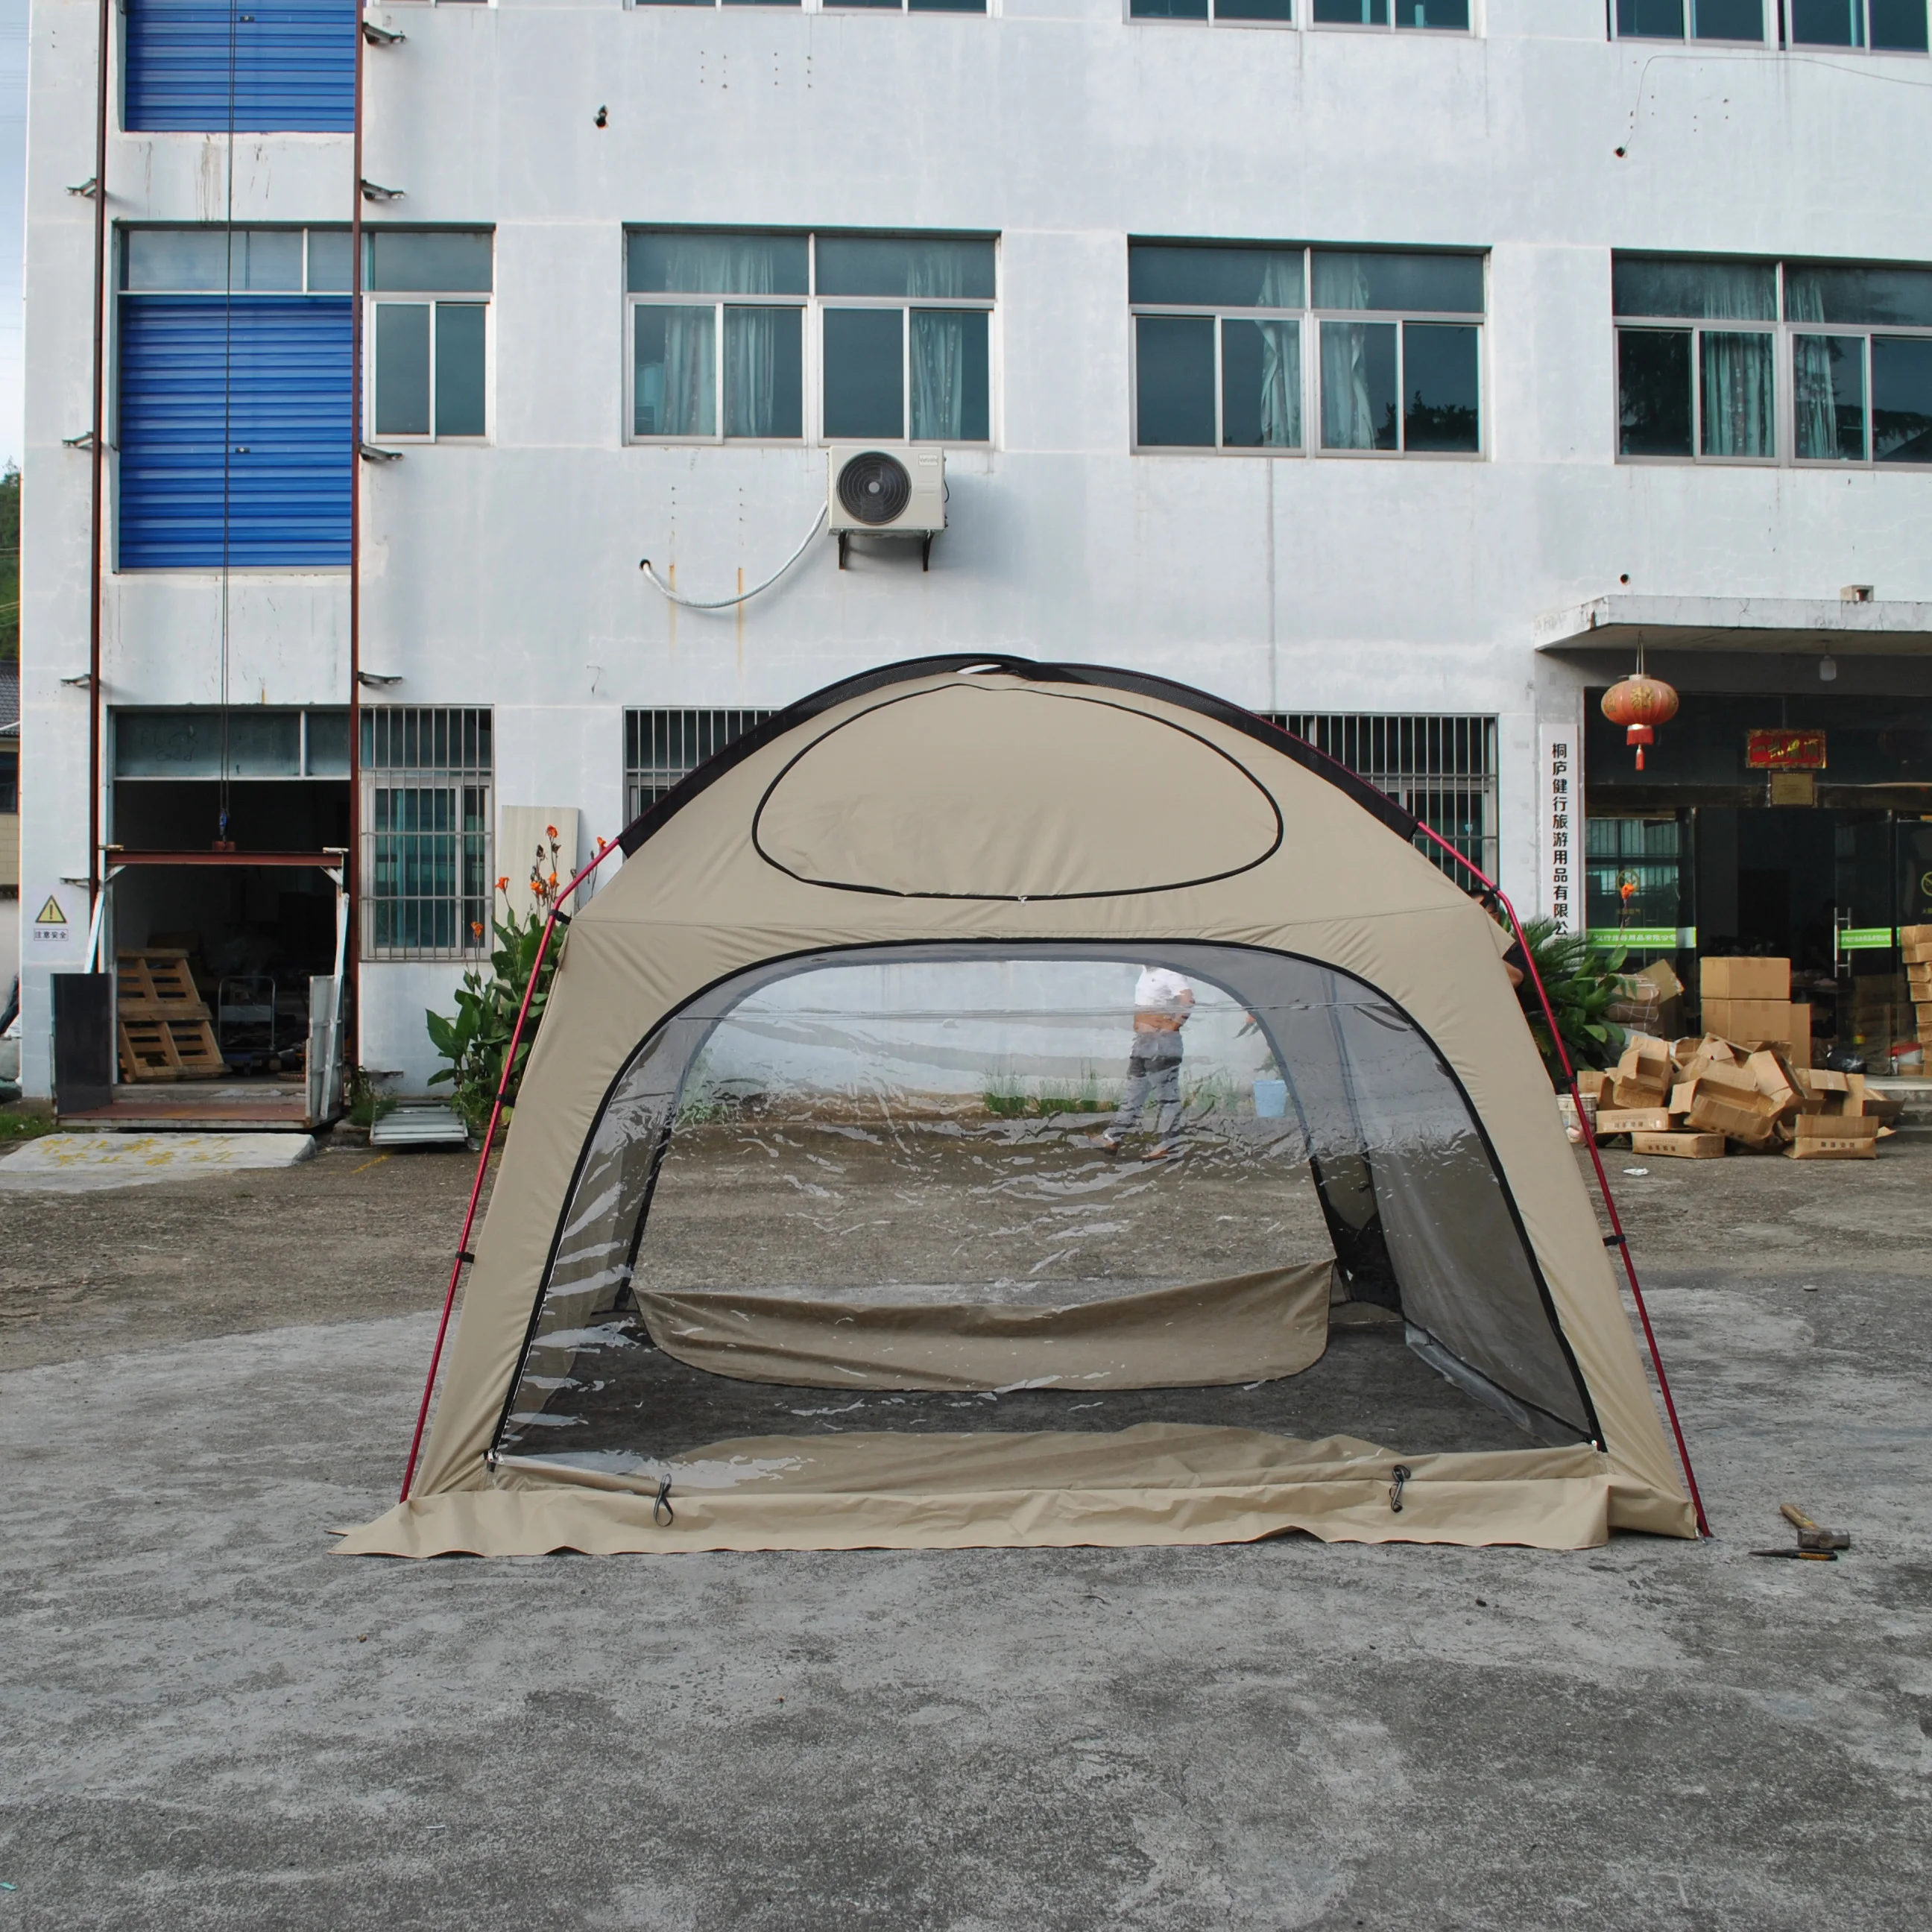 High quaity 6 person transparent tent,6 Person PVC tent for Famiy tent,6 Person Glamping tent,big dome temt with 4 doors